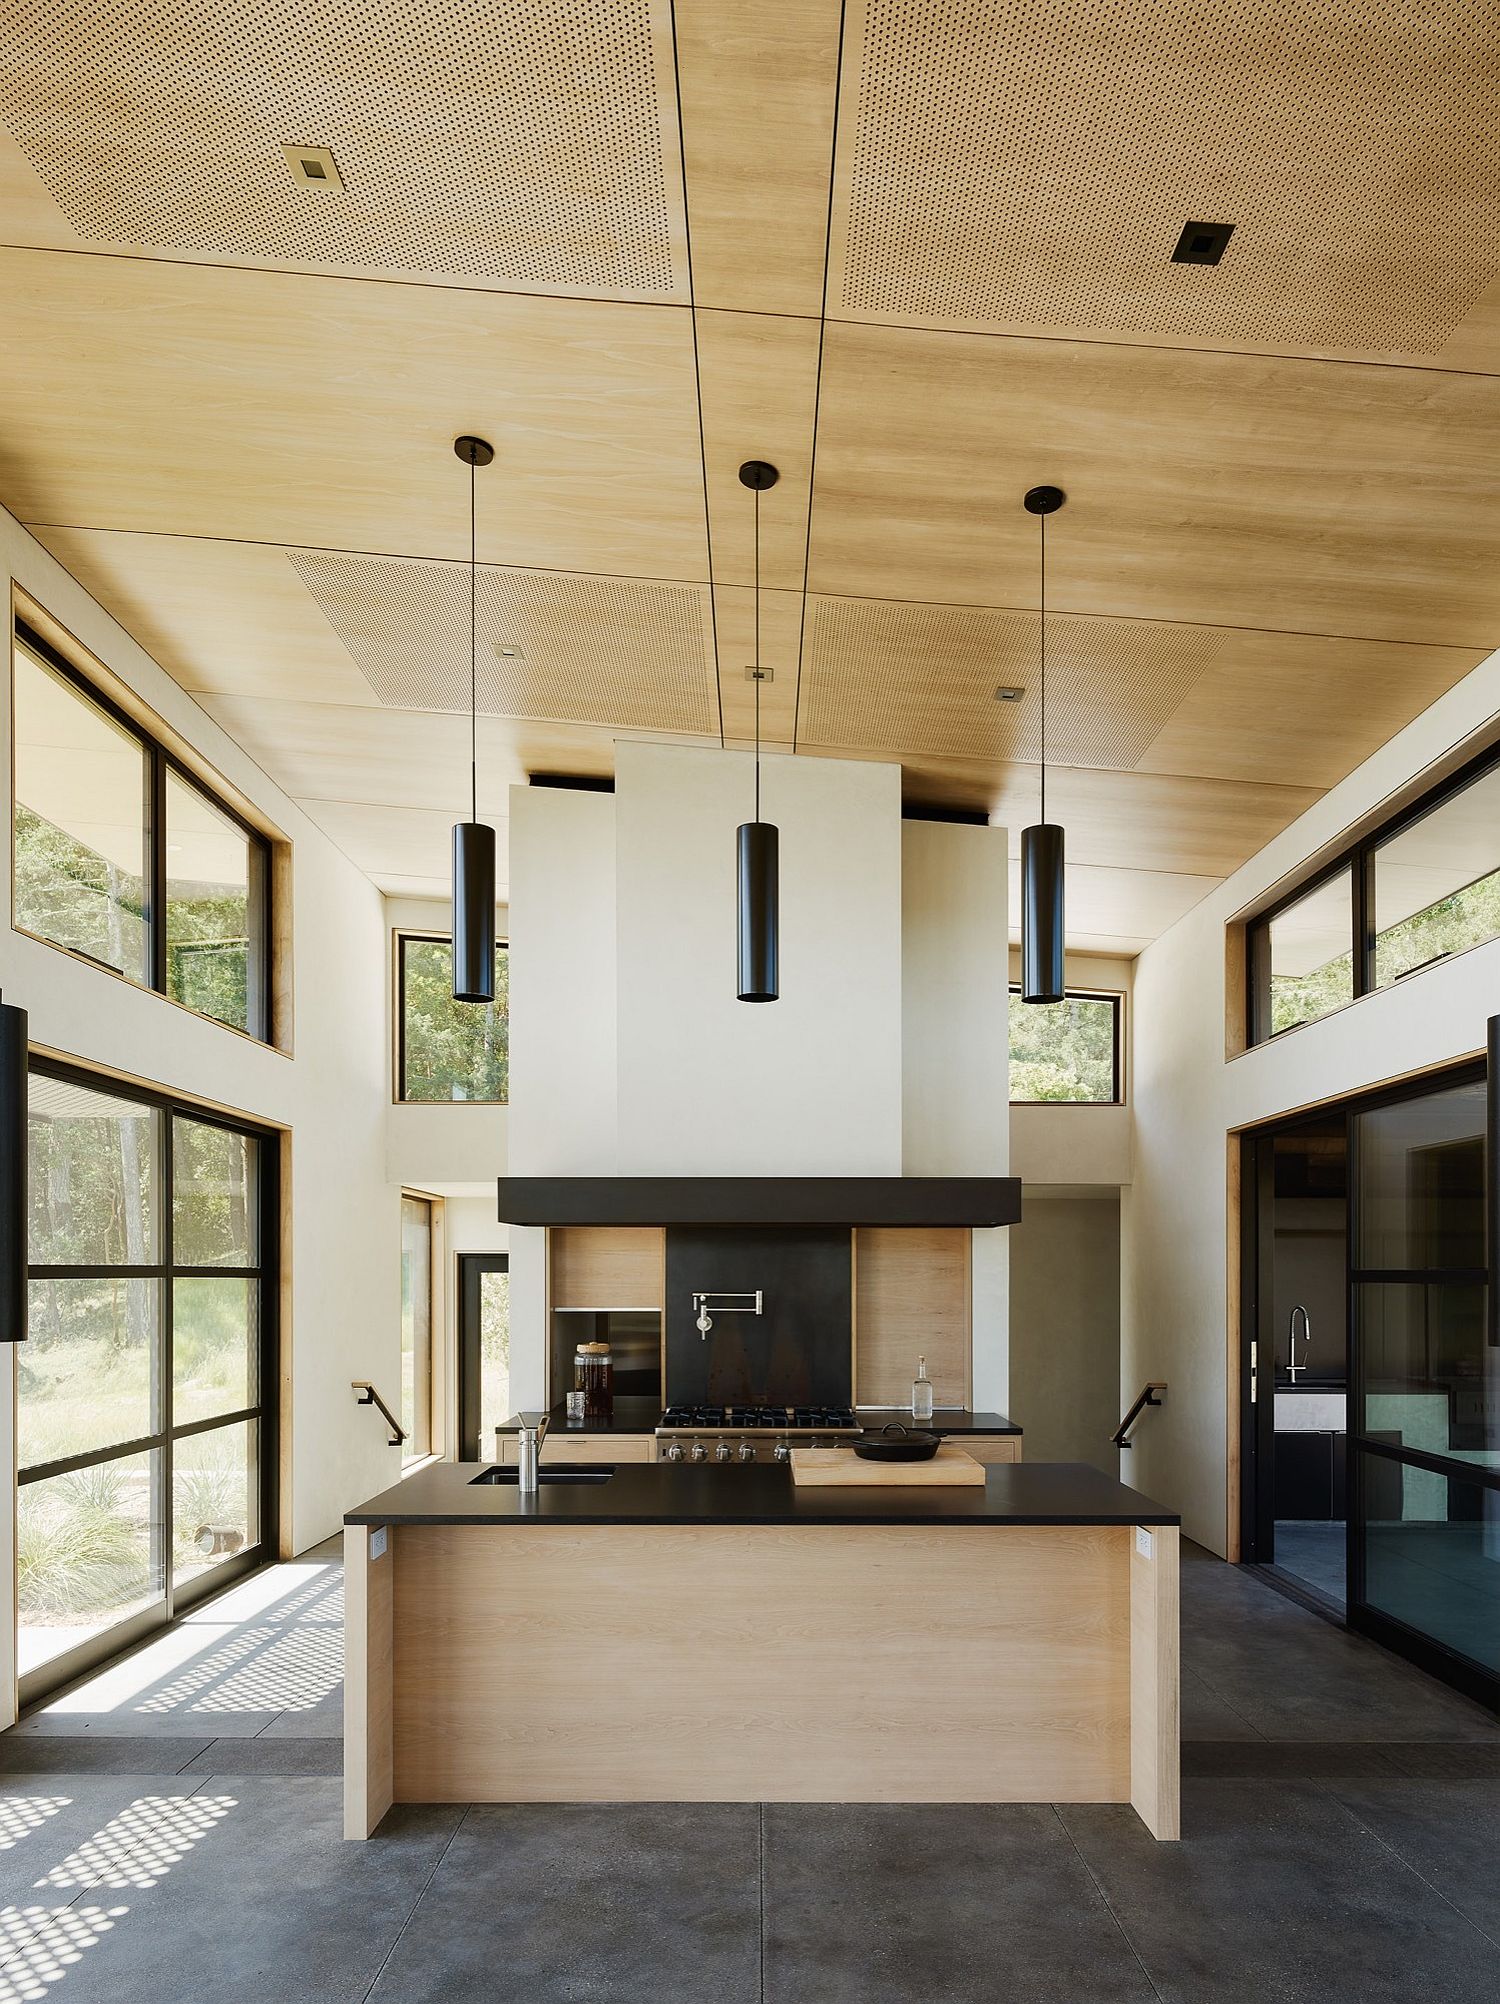 Trio-of-pendants-adds-to-the-charm-of-the-kitchen-with-high-ceiling